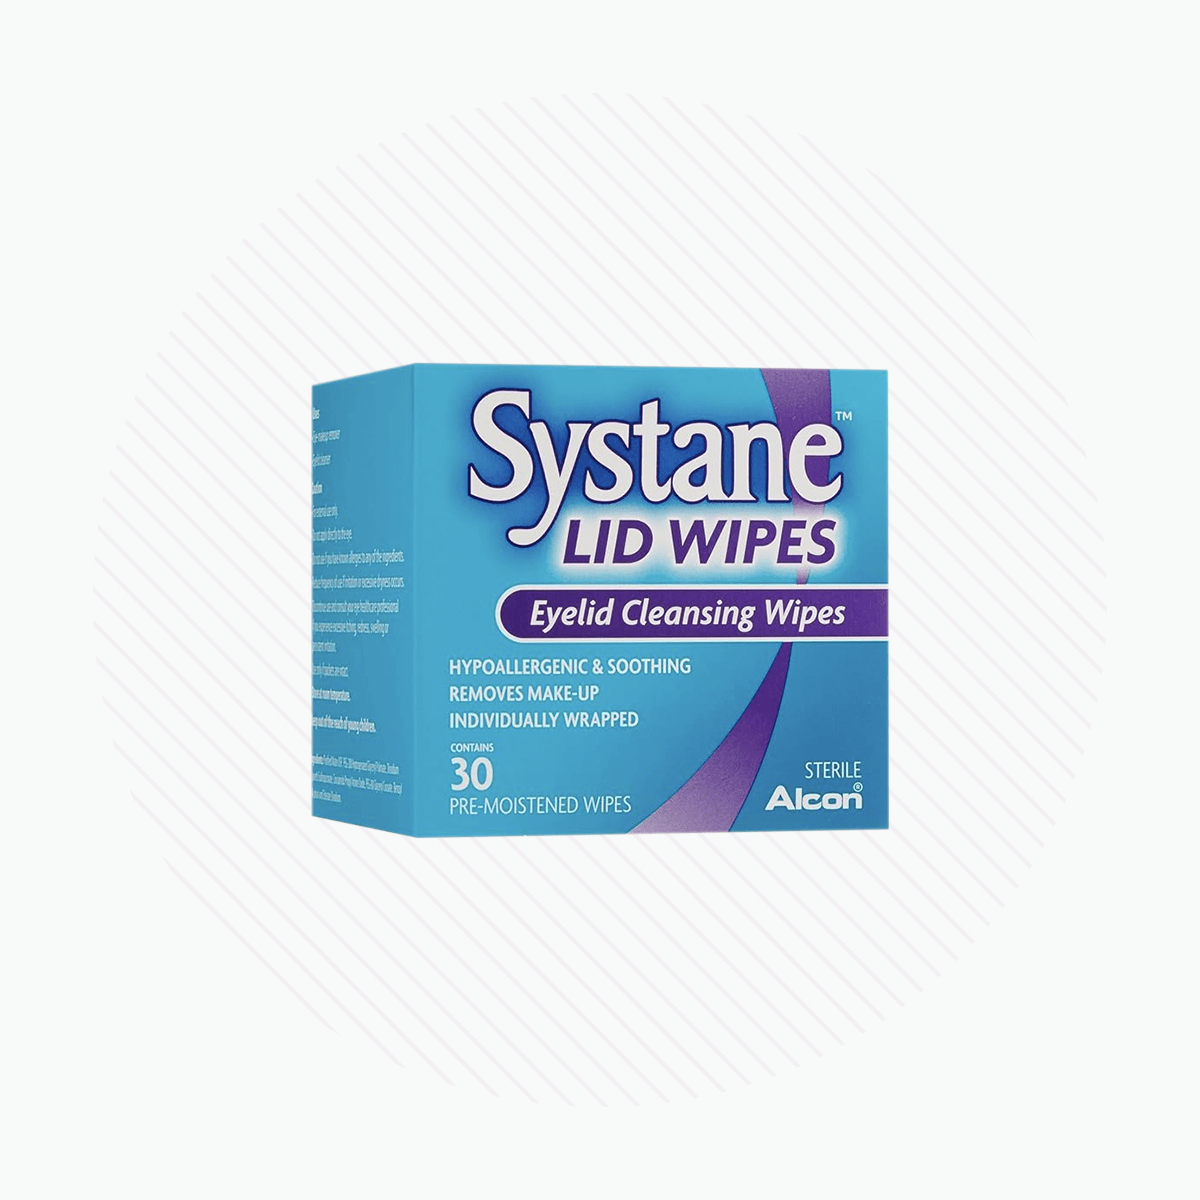 Systane Lid Wipes Eyelid Cleansing, Hypoallergenic, Make-up Remover Wipes, (30 Count) - Dryeye Rescue